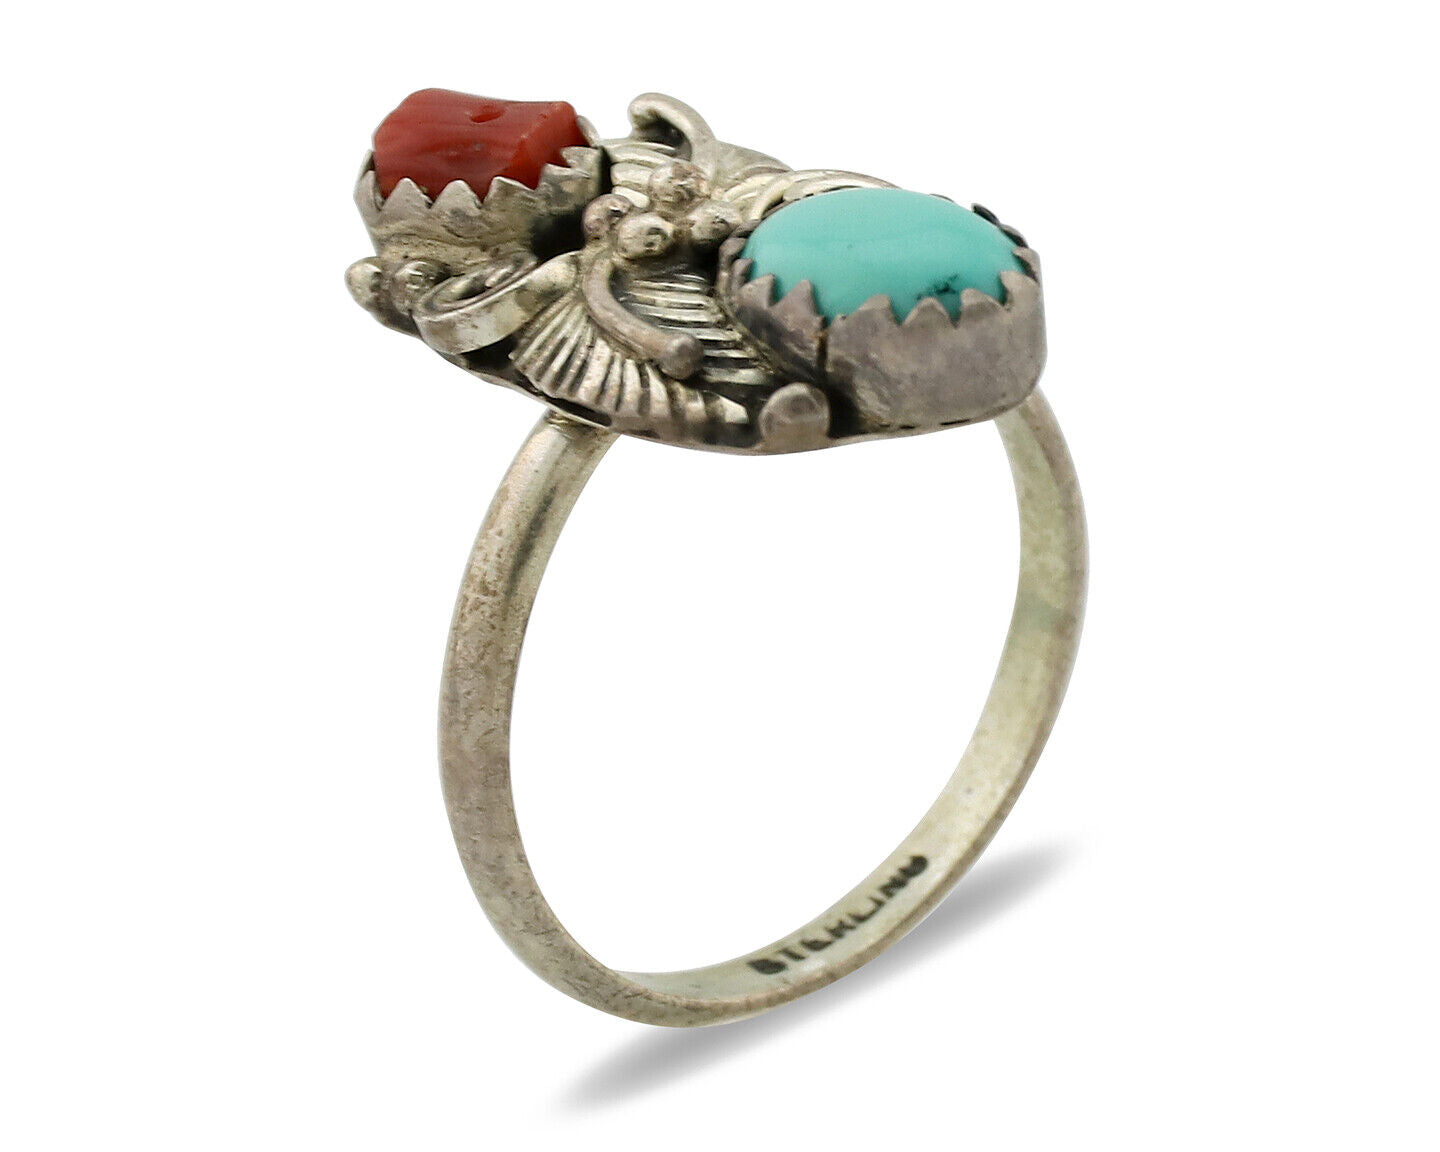 Navajo Ring 925 Silver Coral & Turquoise Handmade Native American Artist C.1980s